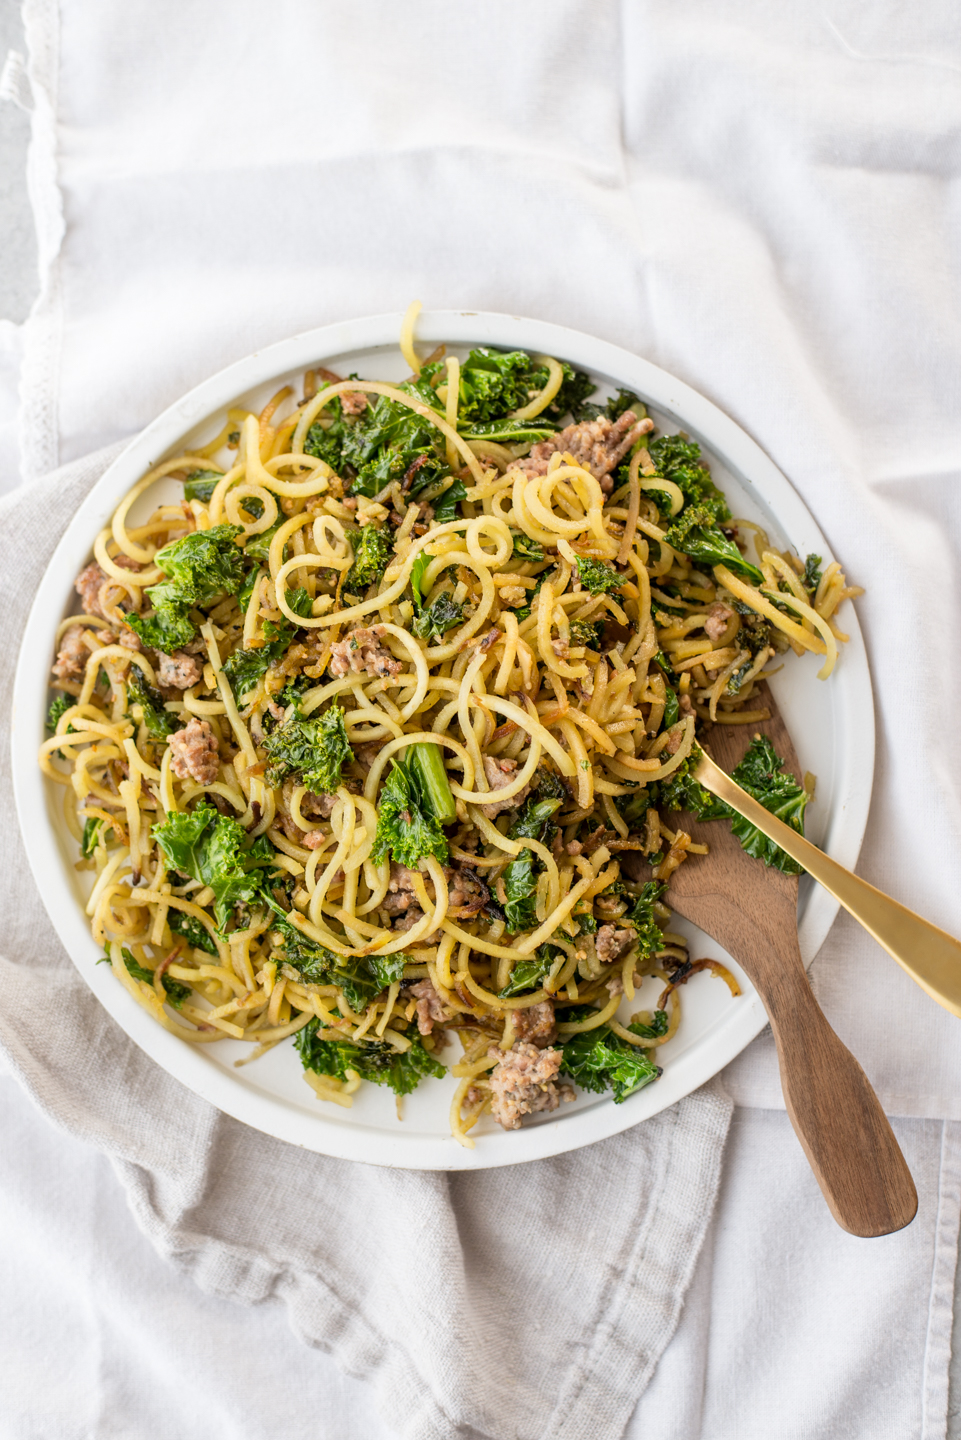 The easy spaghetti recipe you've been missing! This six ingredient spaghetti with garlic and kale is made in less than 20 minutes! #healthy #paleo #30minute